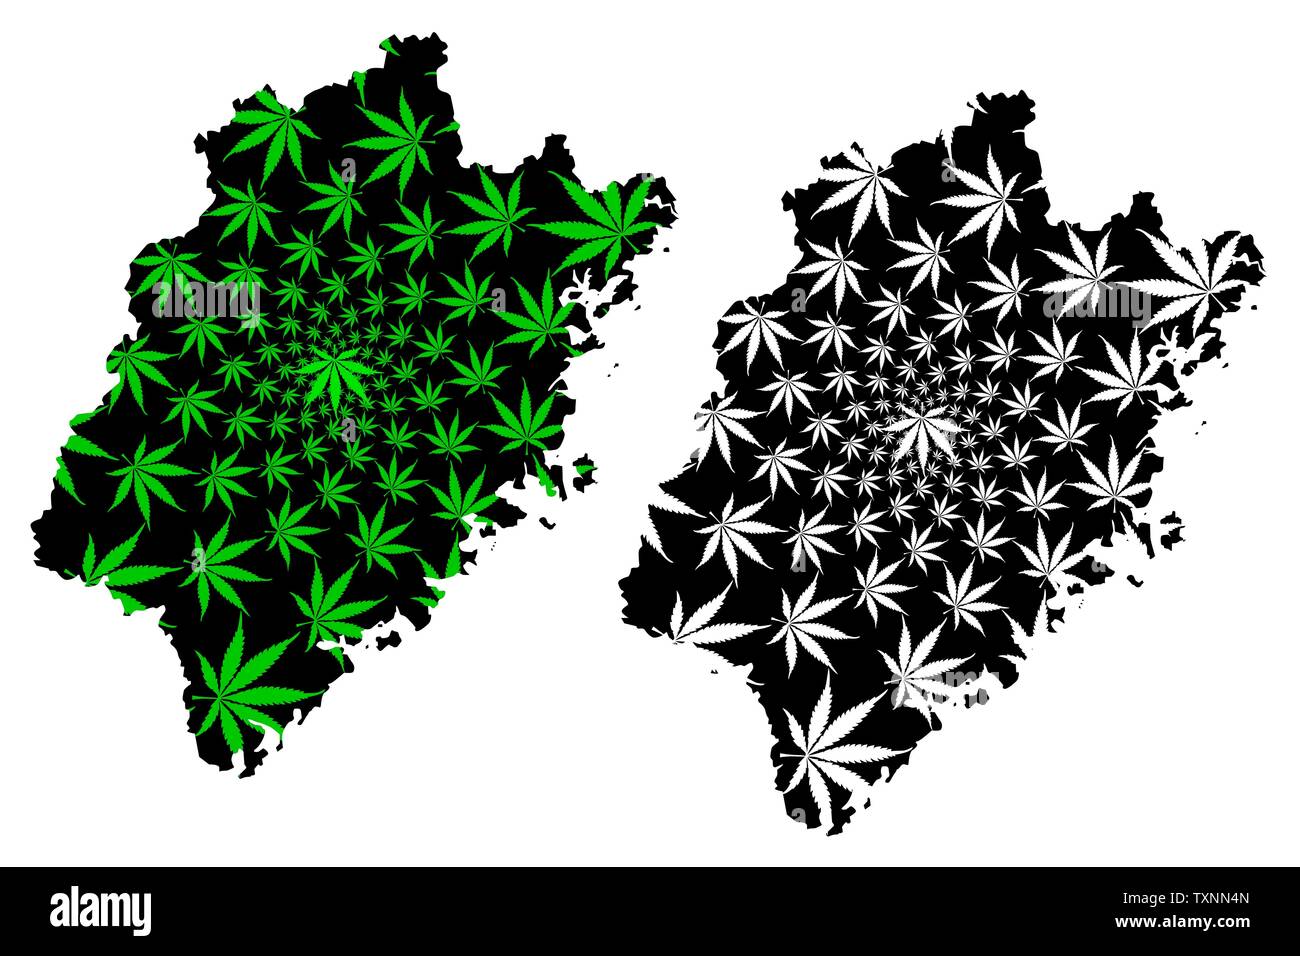 Fujian Province (Administrative divisions of China, China, People's Republic of China, PRC) map is designed cannabis leaf green and black, Fujian map Stock Vector